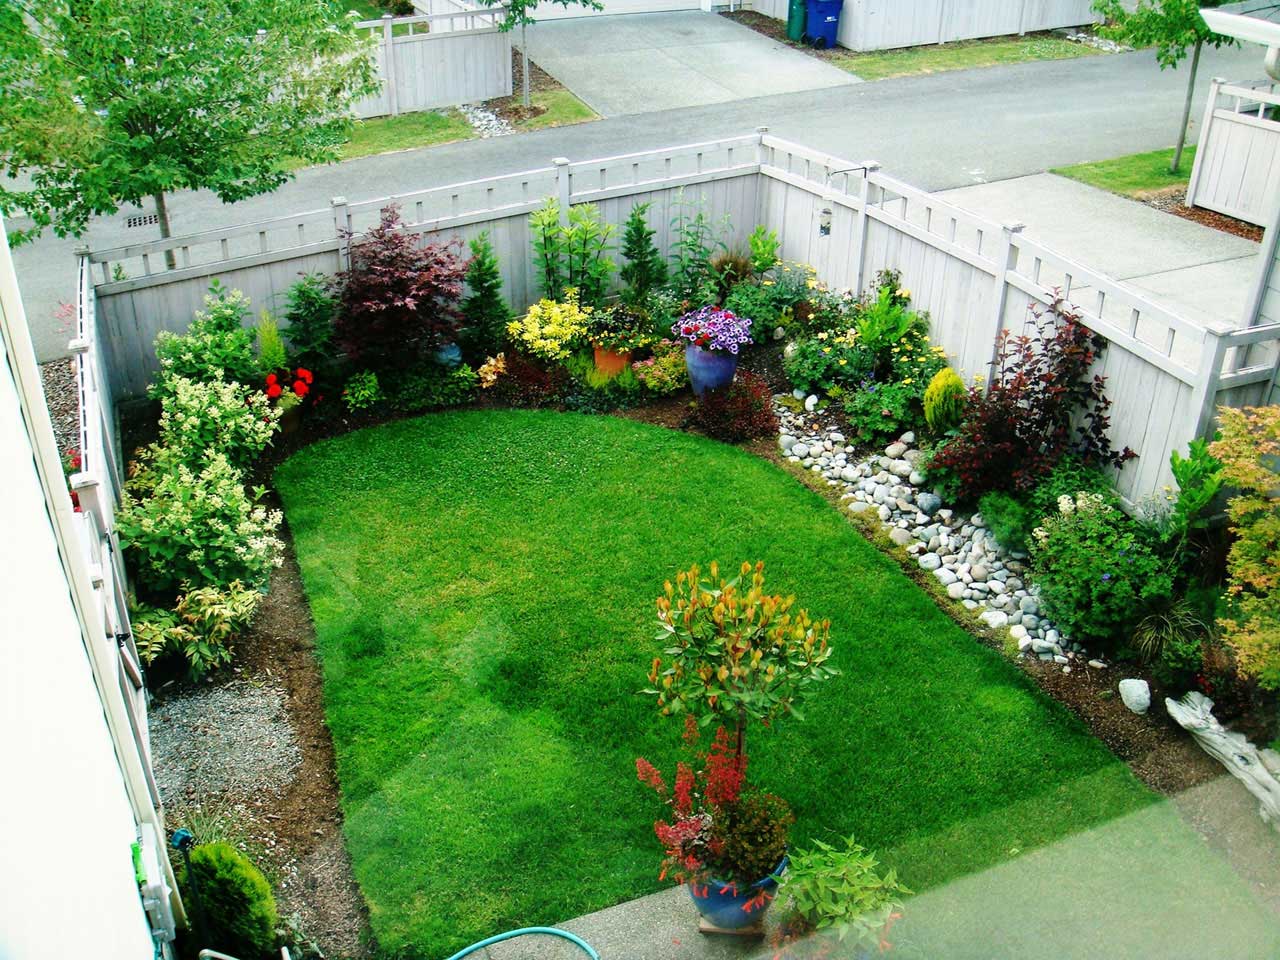 Backyard Landscape Colorful Small Backyard Landscape Design Using Colorful Flower And Green Garden Completed With White Wooden Fence Design Outdoor Backyard Landscape Design To Make The Most Of Your Space